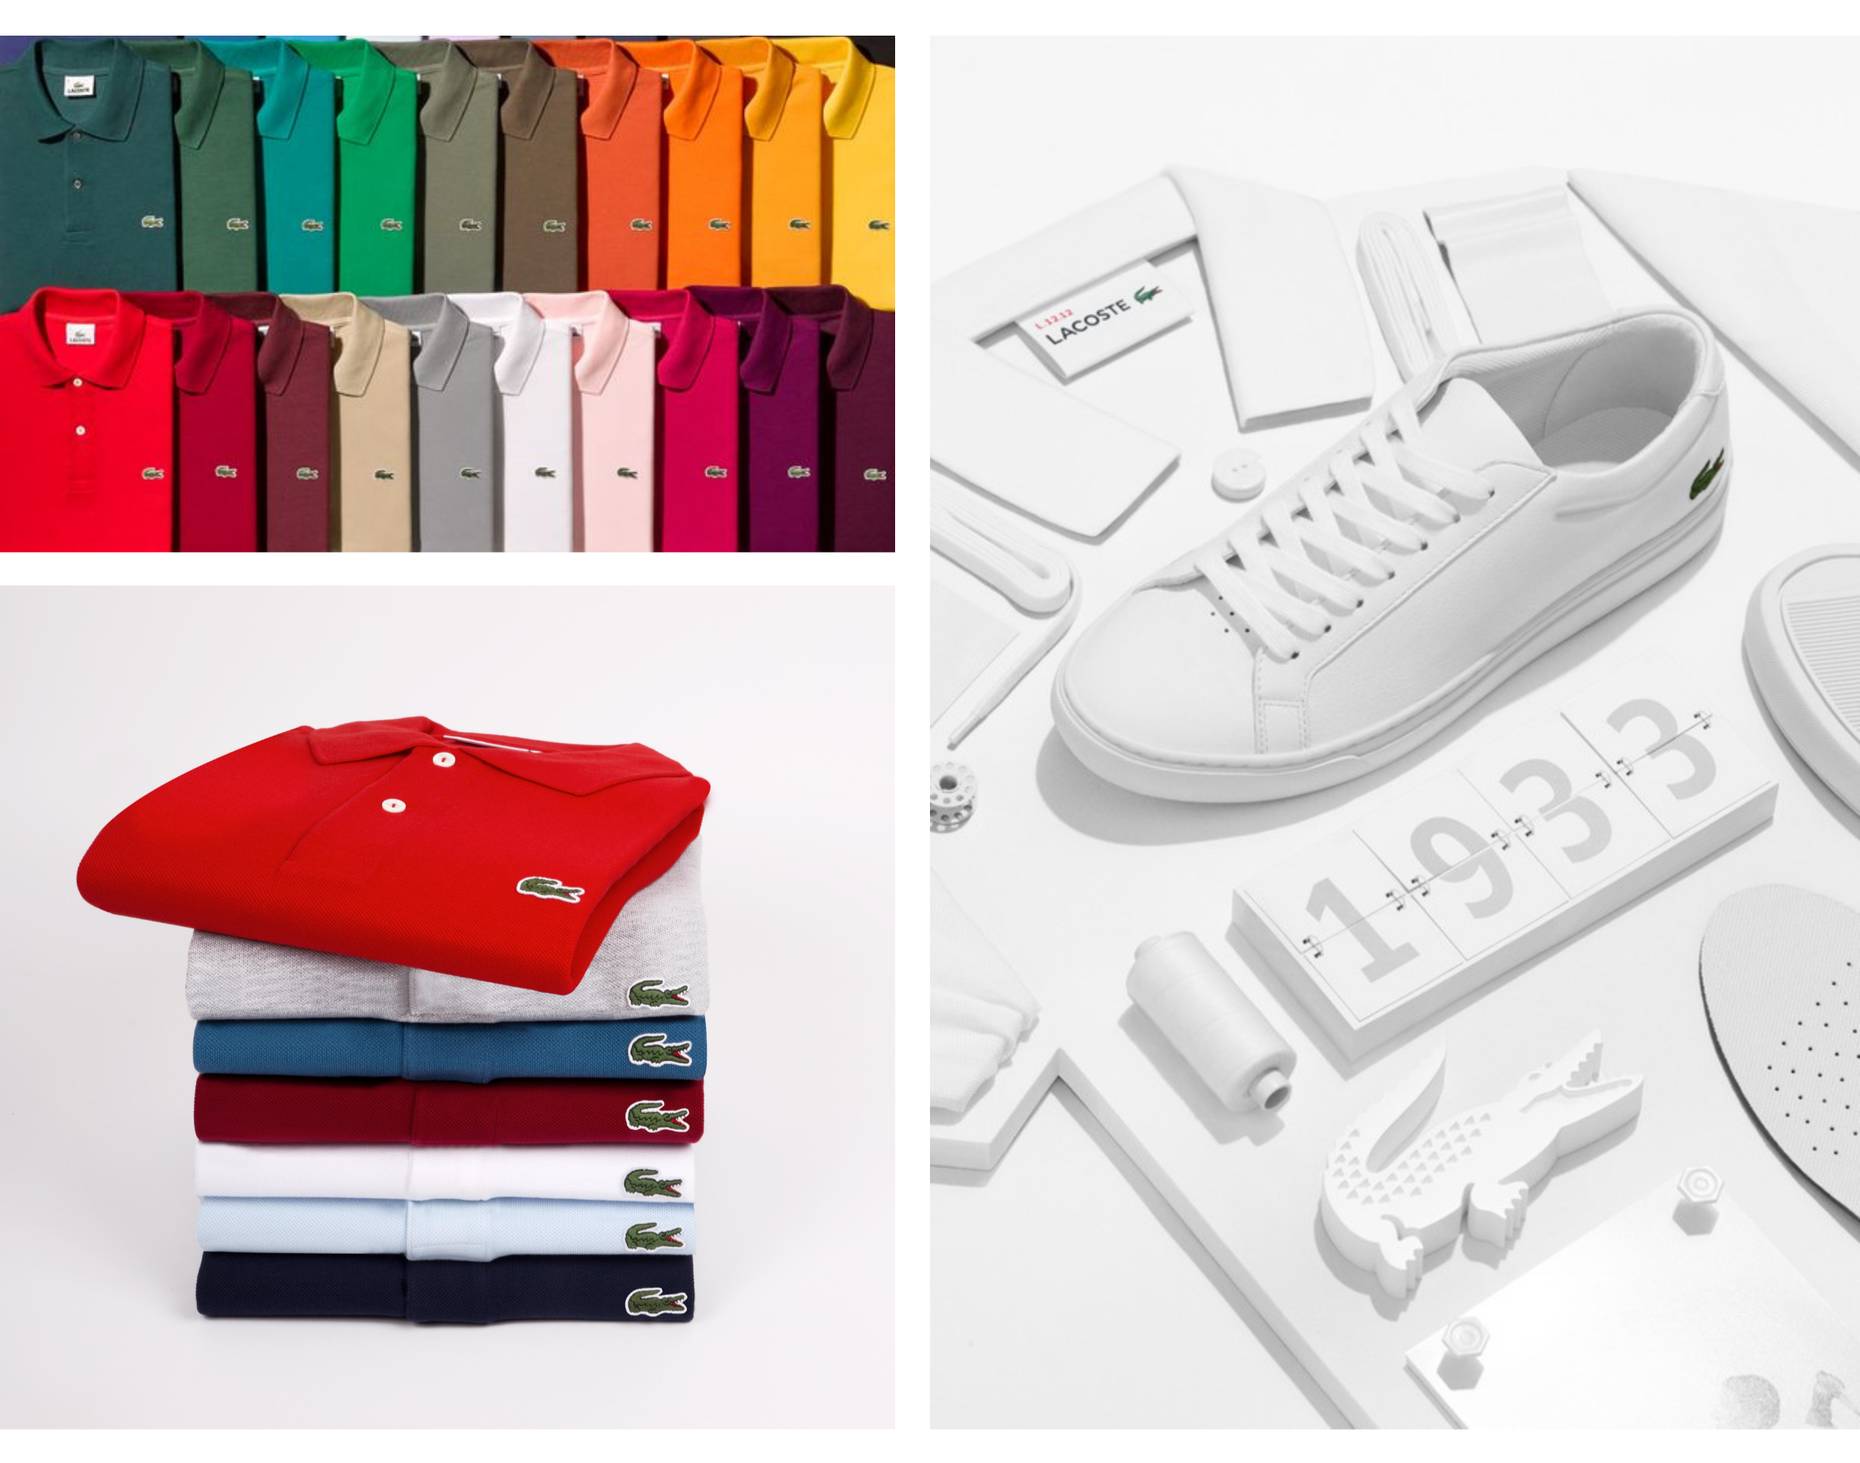 About Lacoste